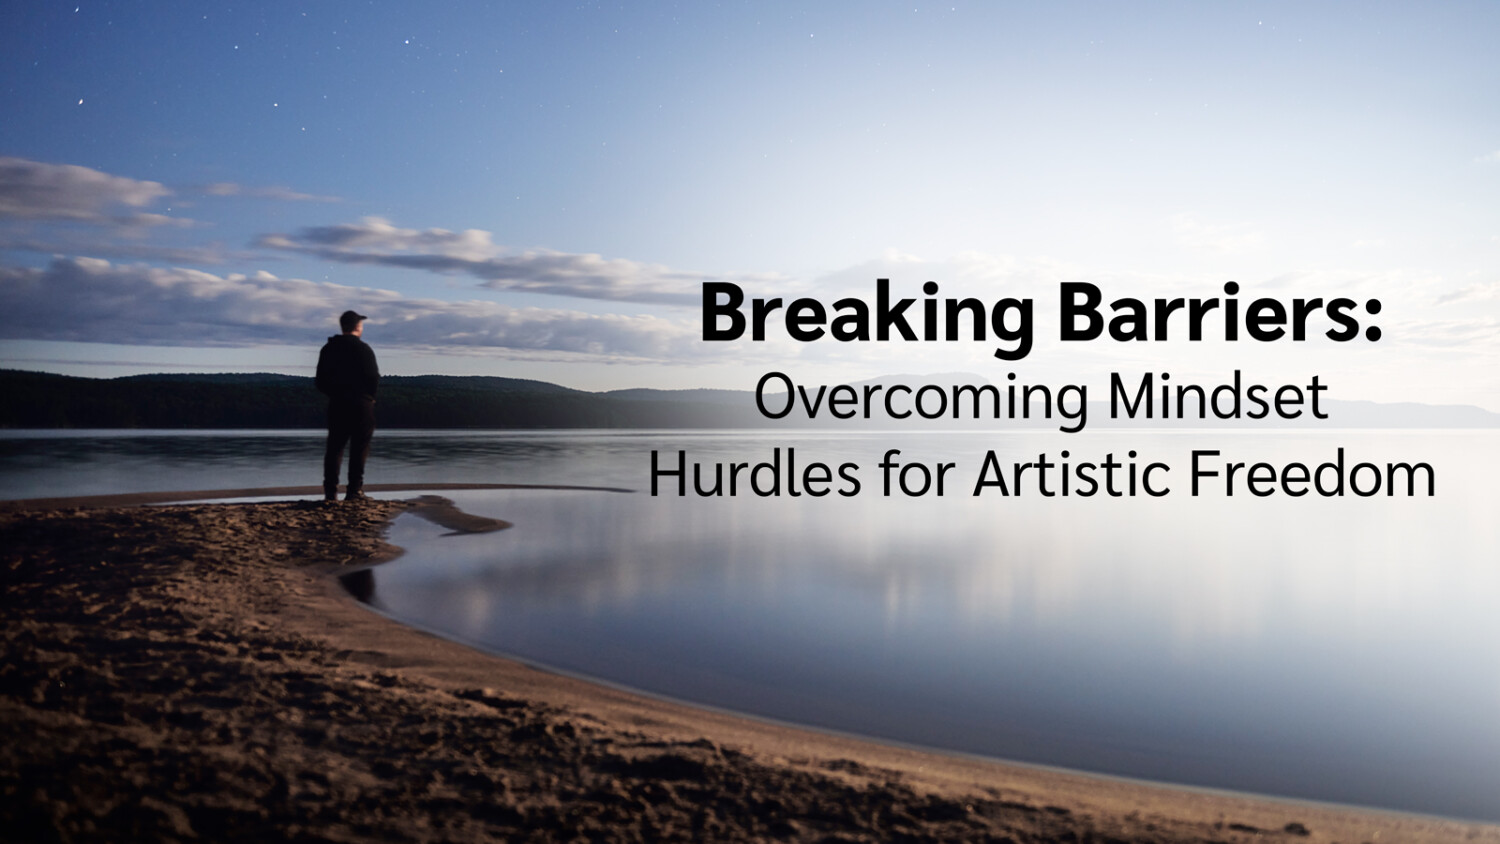 Breaking Barriers: Overcoming Mindset Hurdles for Artistic Freedom